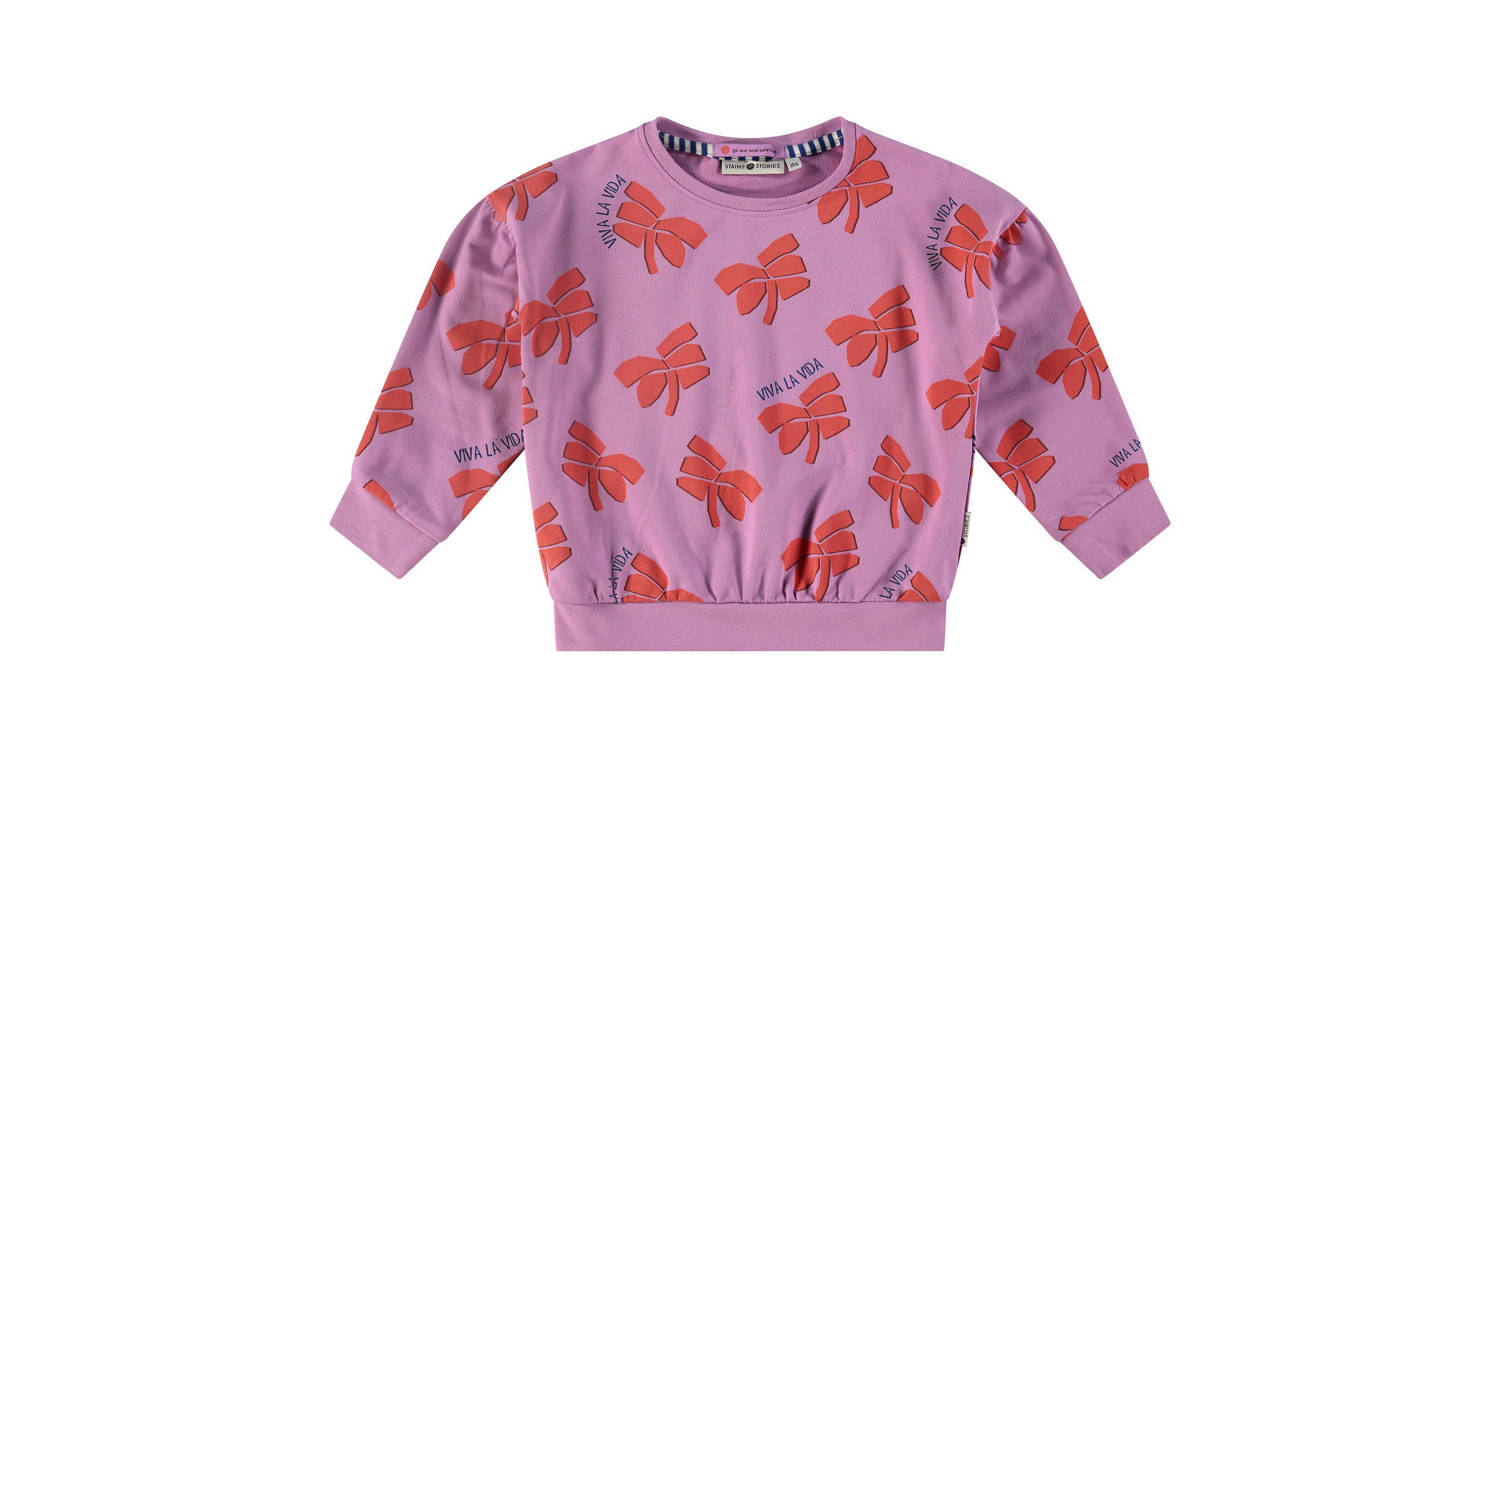 Stains&Stories sweater met all over print paars oranje All over print 104